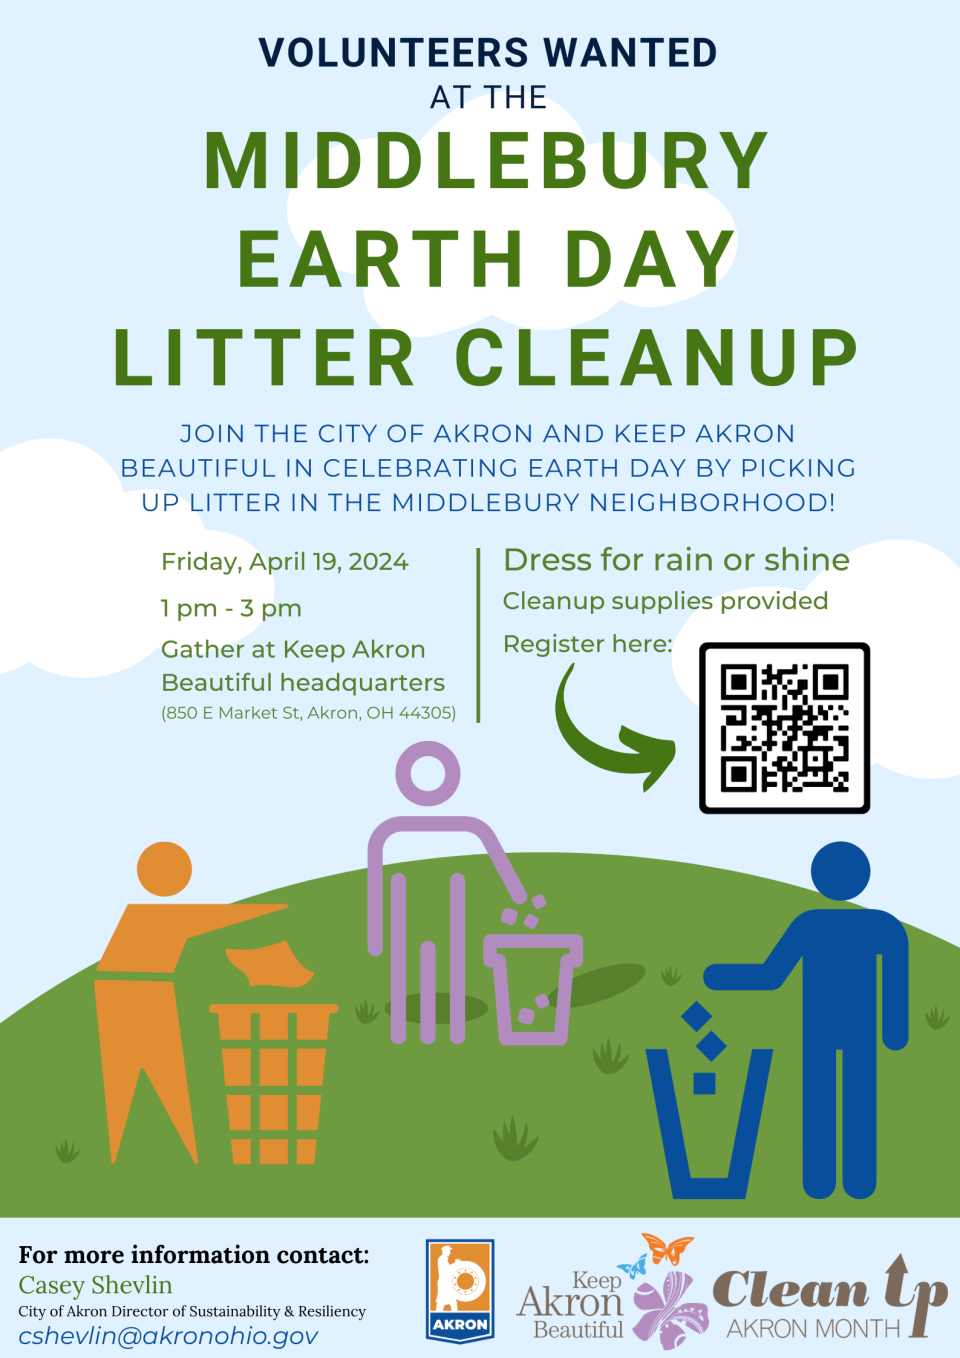 On Friday, the City of Akron and Keep Akron Beautiful are co-hosting a cleanup of the Middlebury neighborhood in honor of Earth Day.